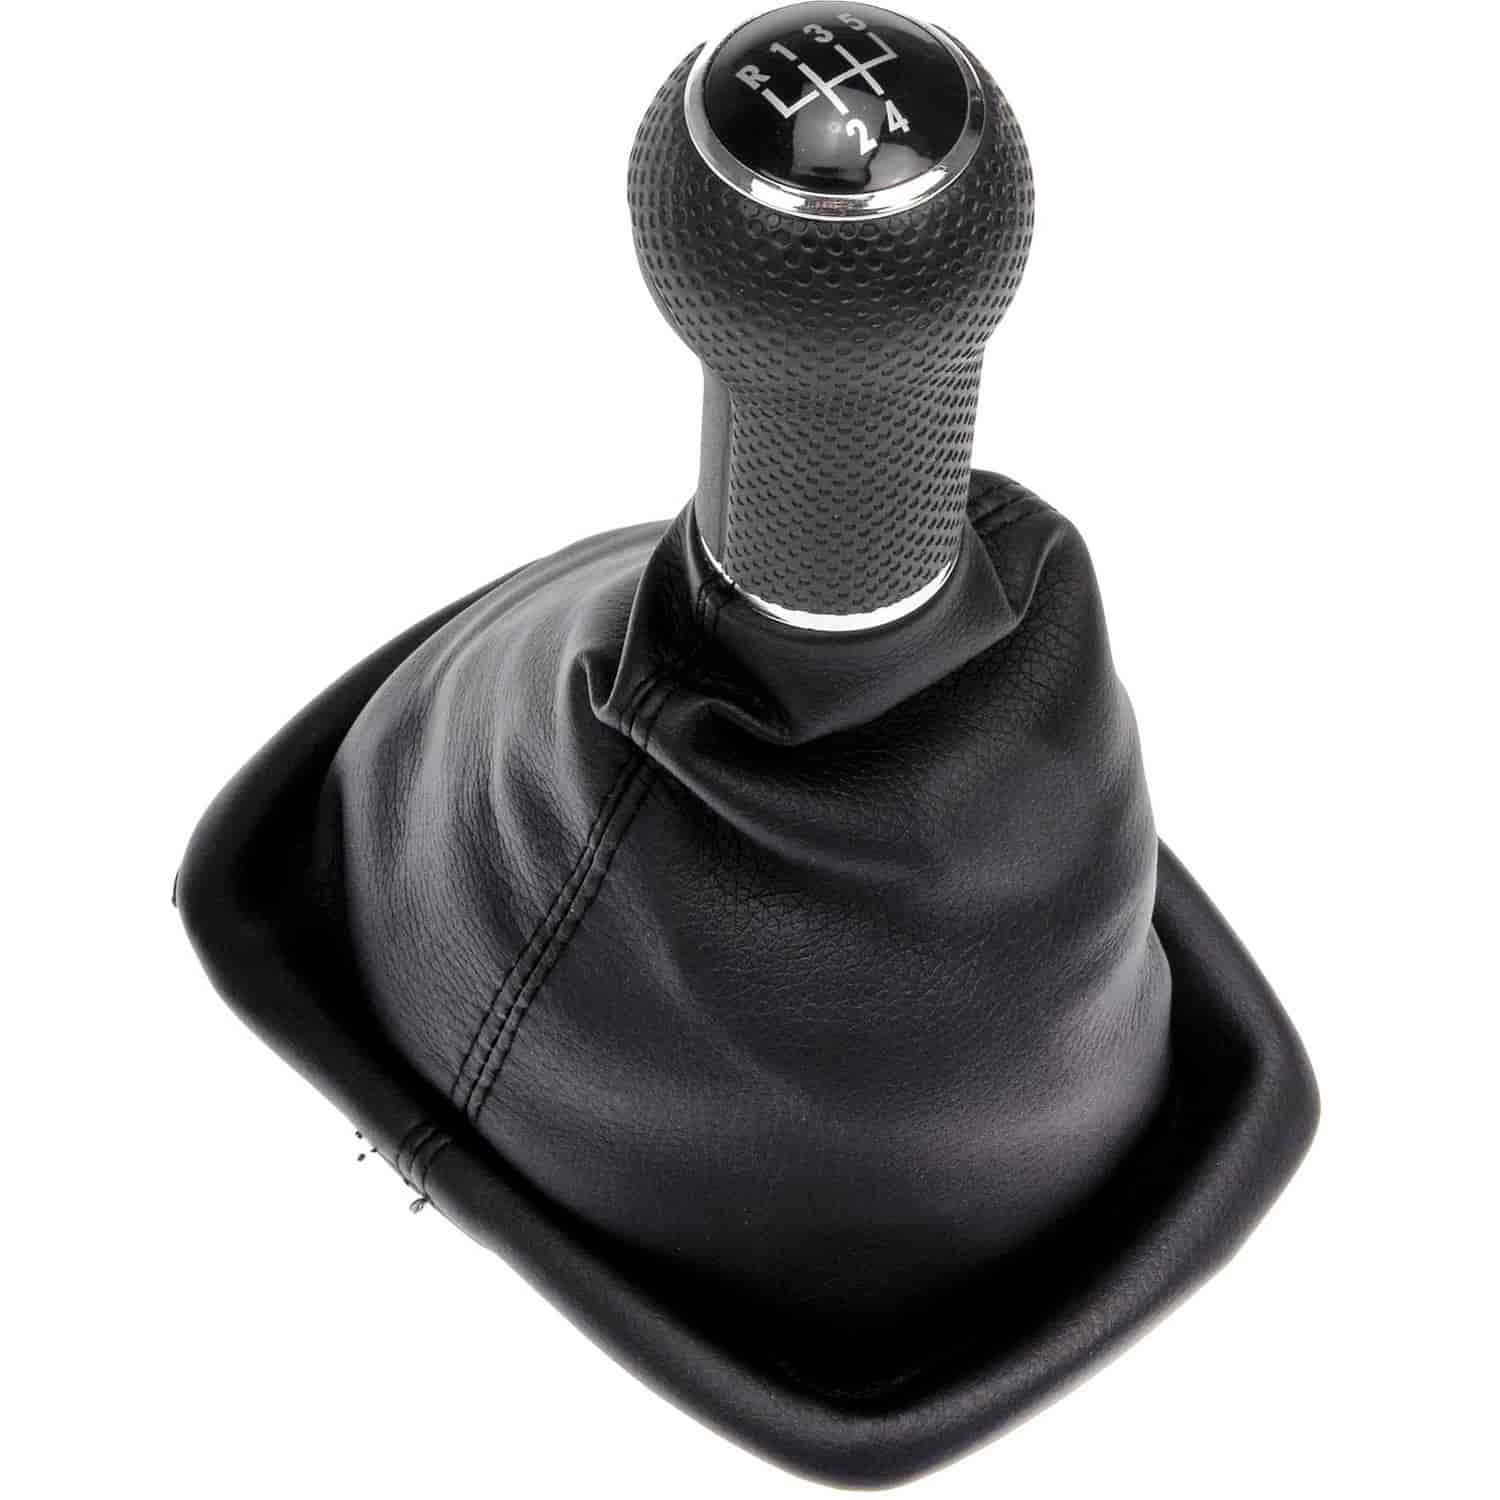 Shift Boot With Knob Replacement